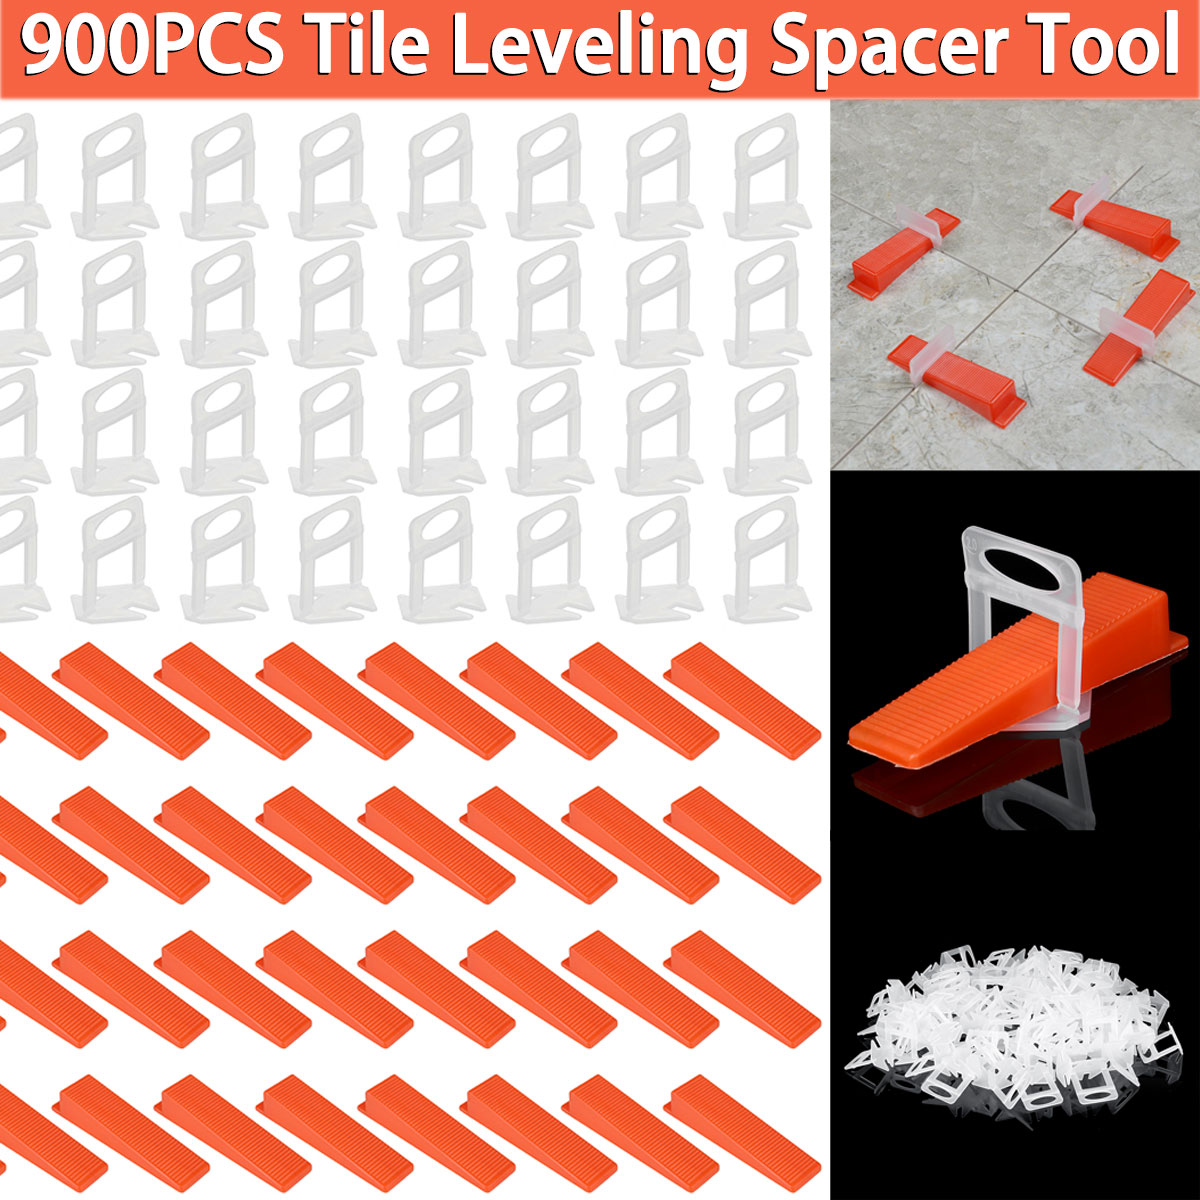 900PCS-Tile-Leveling-Spacer-System-Tool-Kit-Wedge--Clips-Locator-Without-Plier-1849055-1